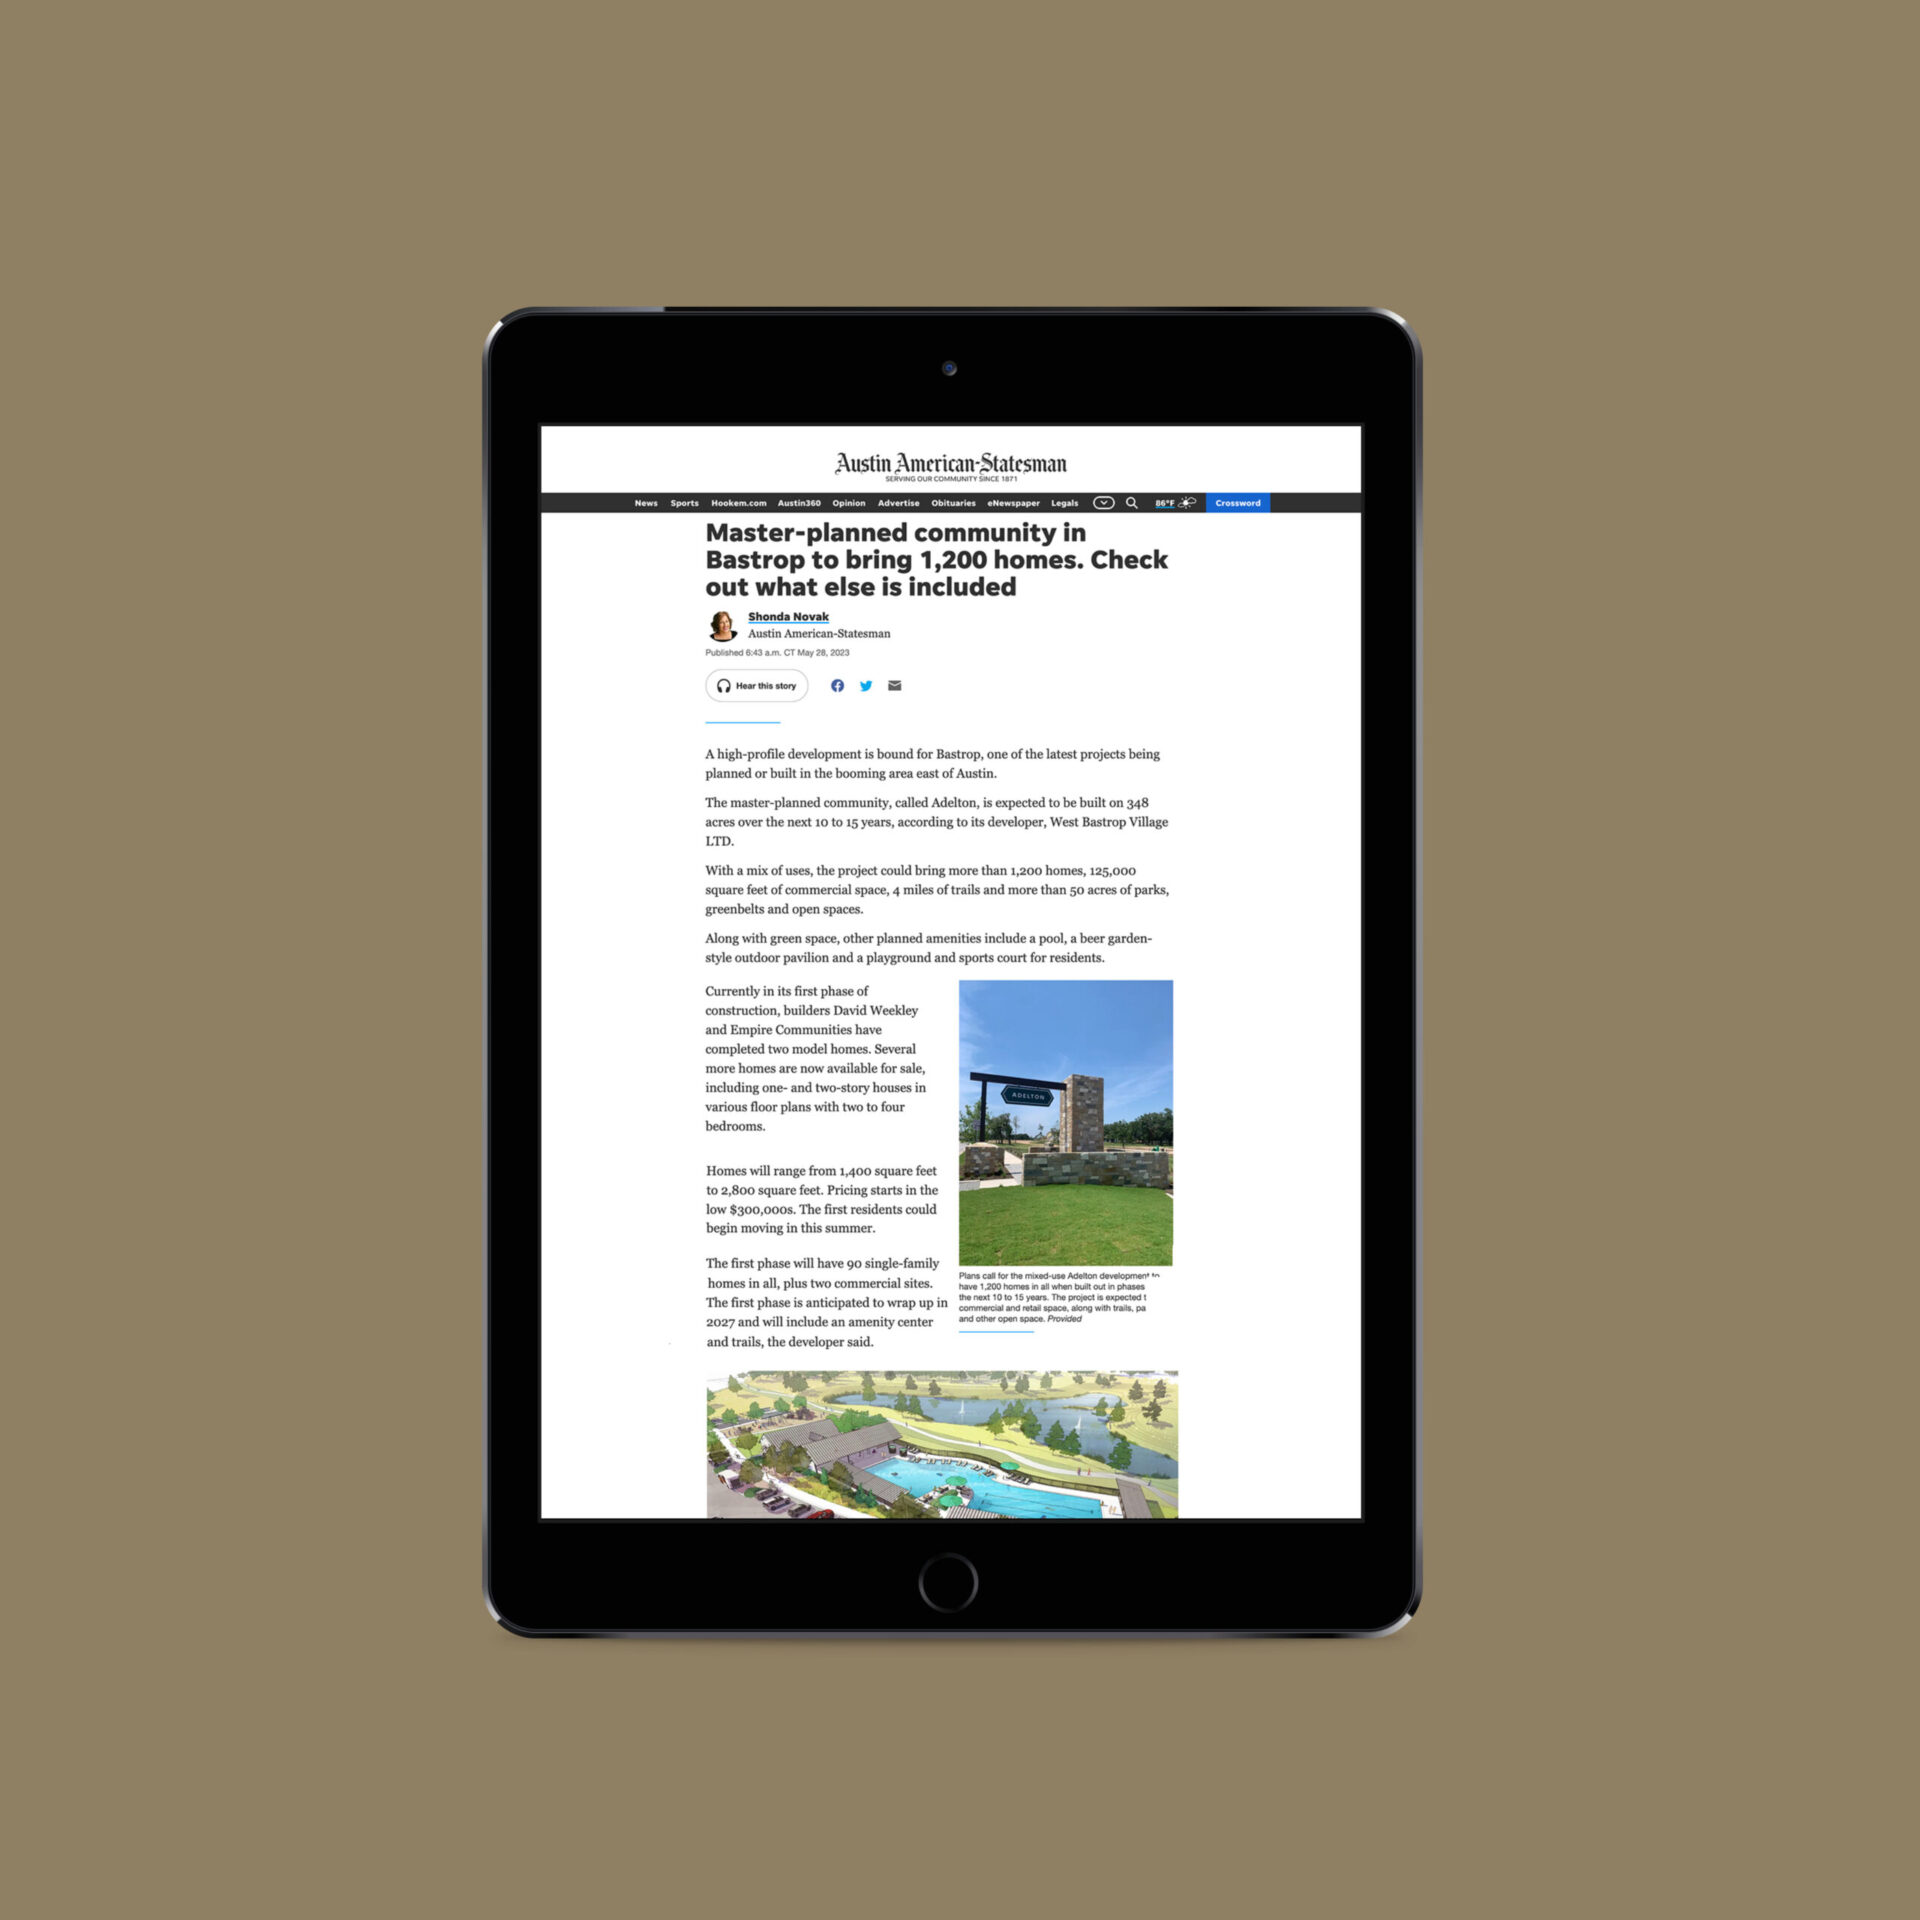 An iPad mockup of news coverage for Adelton in the Austin American Statesman